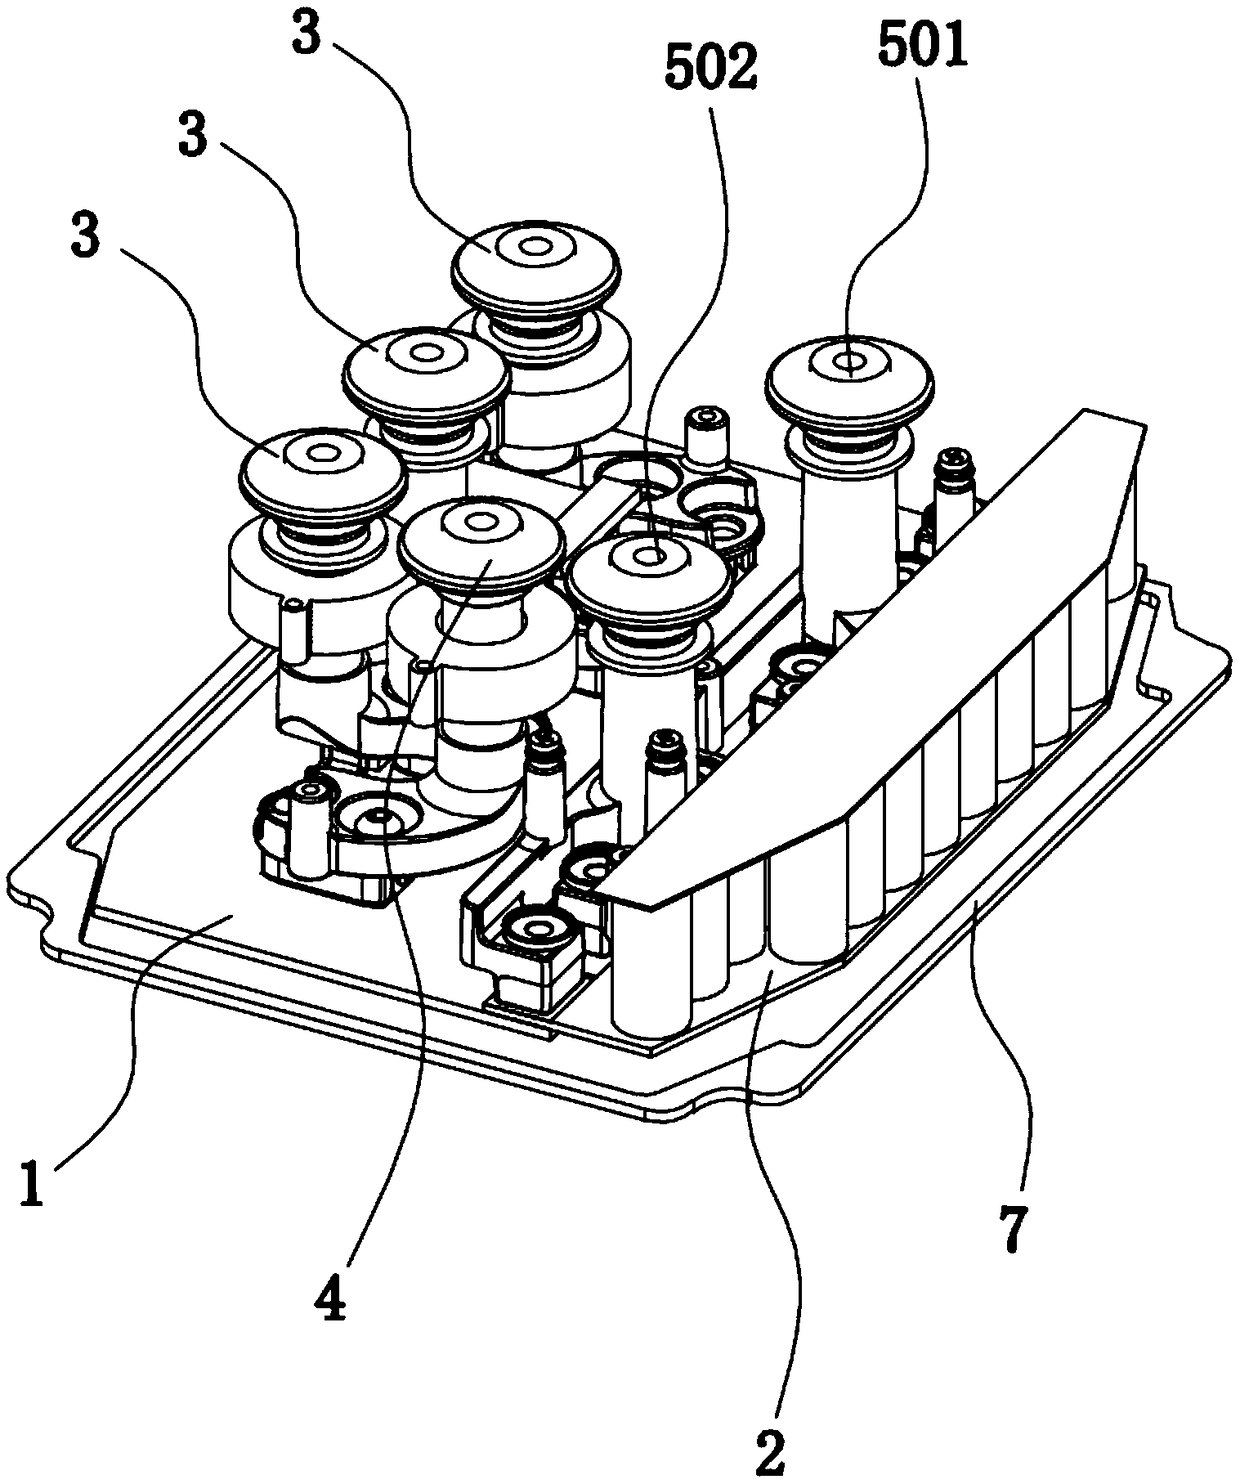 Current-sharing circuit structure and electric vehicle motor control adopting that structure